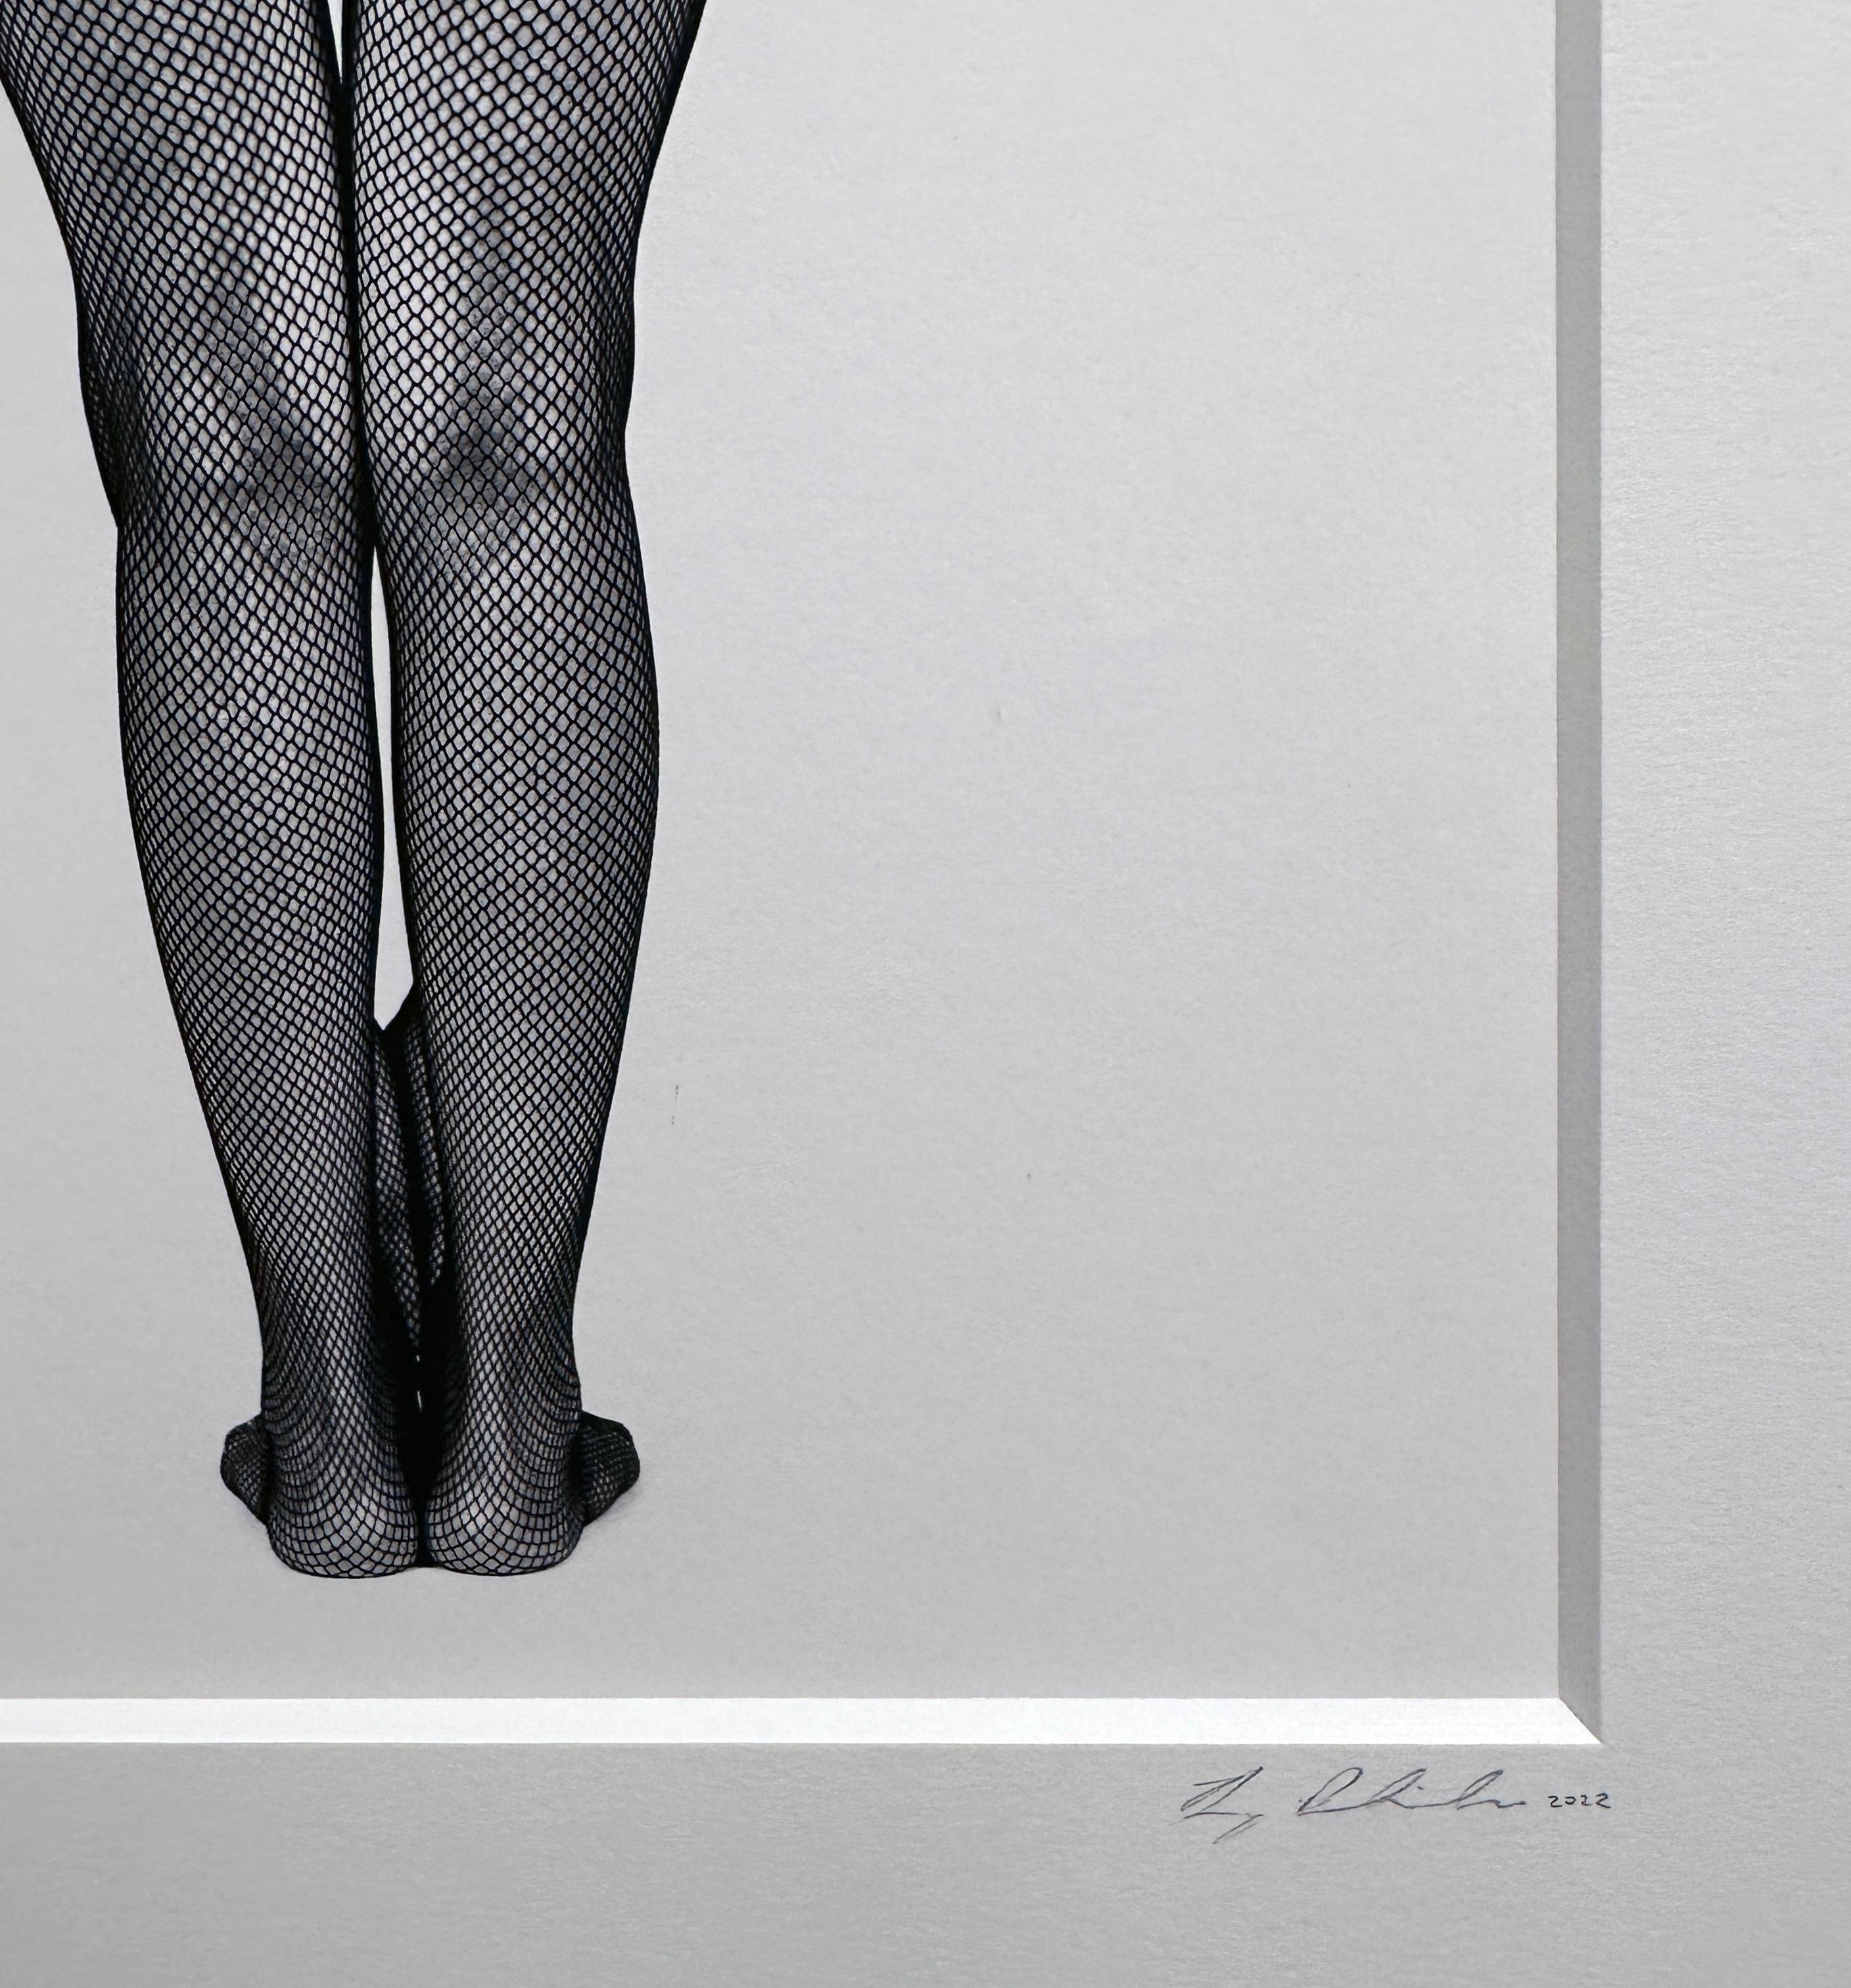 A Woman with a Hook, 1993 - Erotic Photo, Fishnet Stockings, Matted and Framed For Sale 2